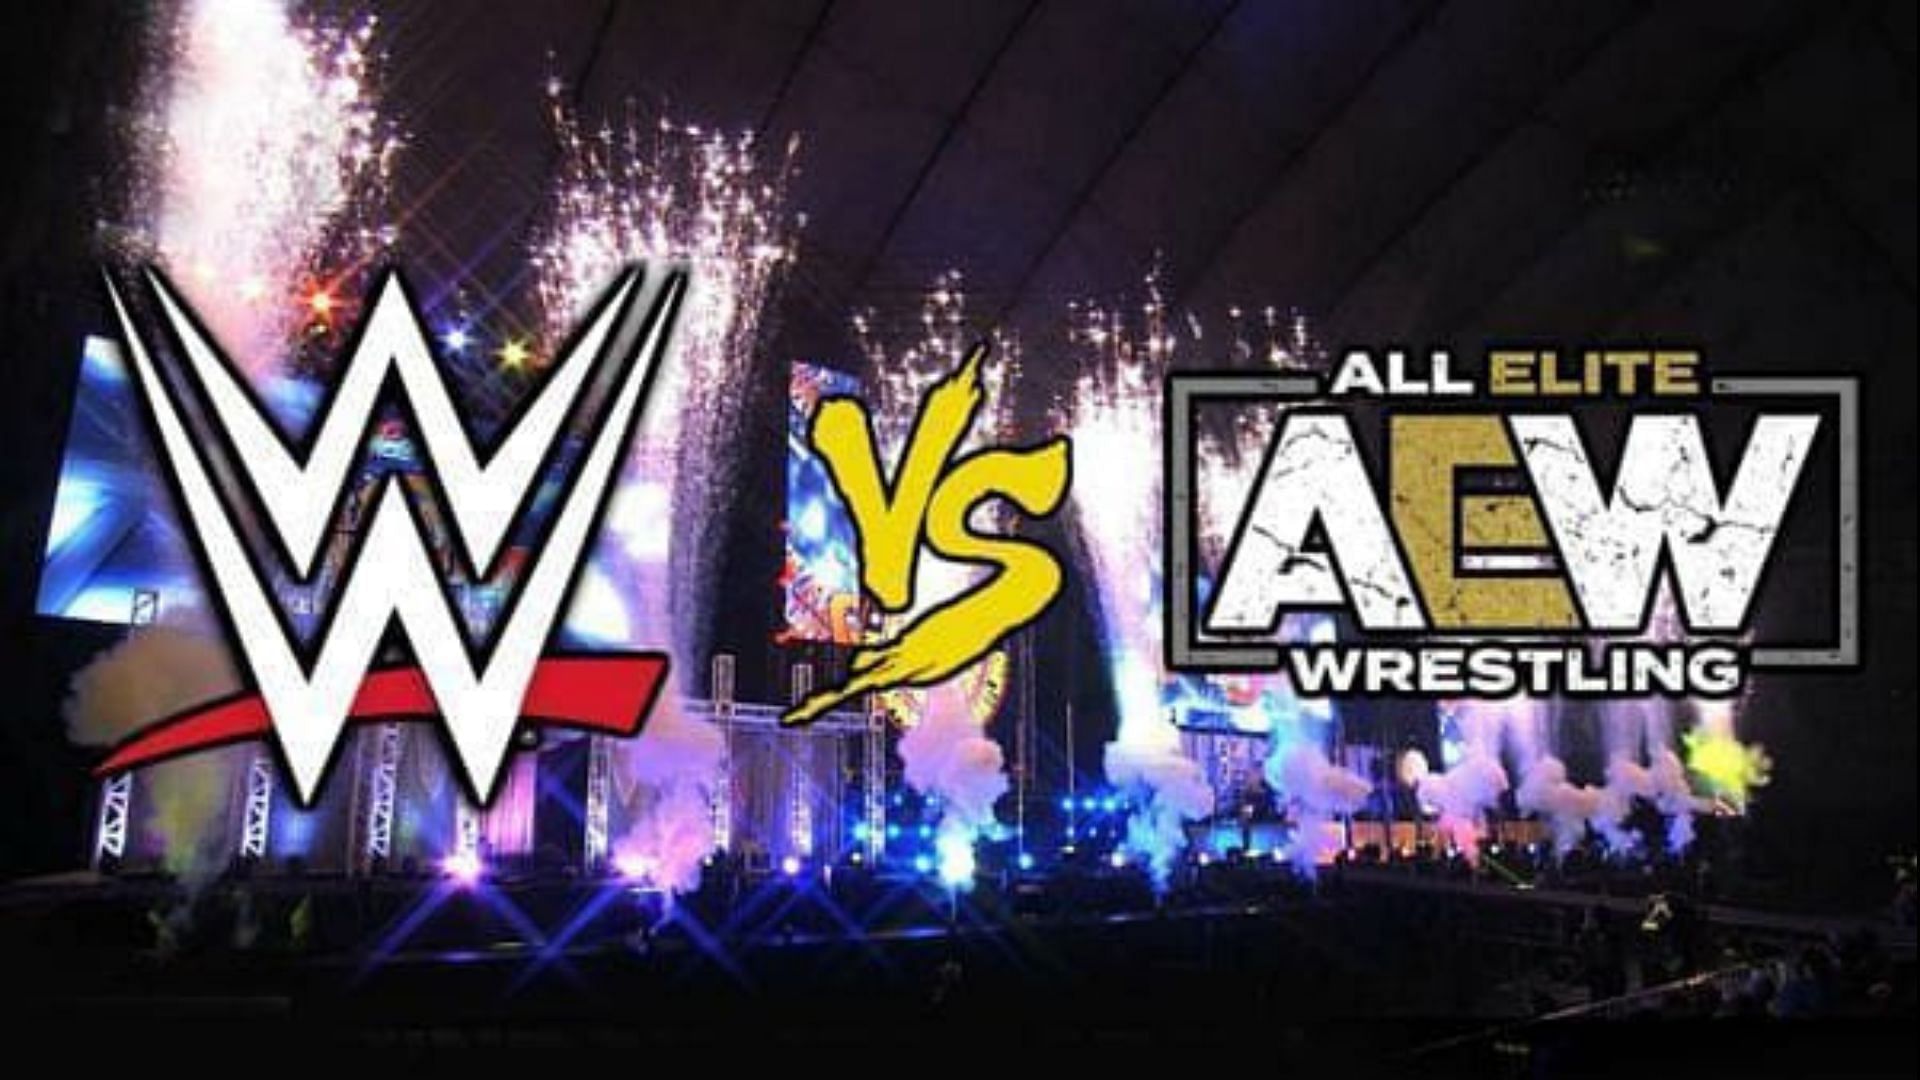 AEW and WWE are mega-players in the wrestling industry.